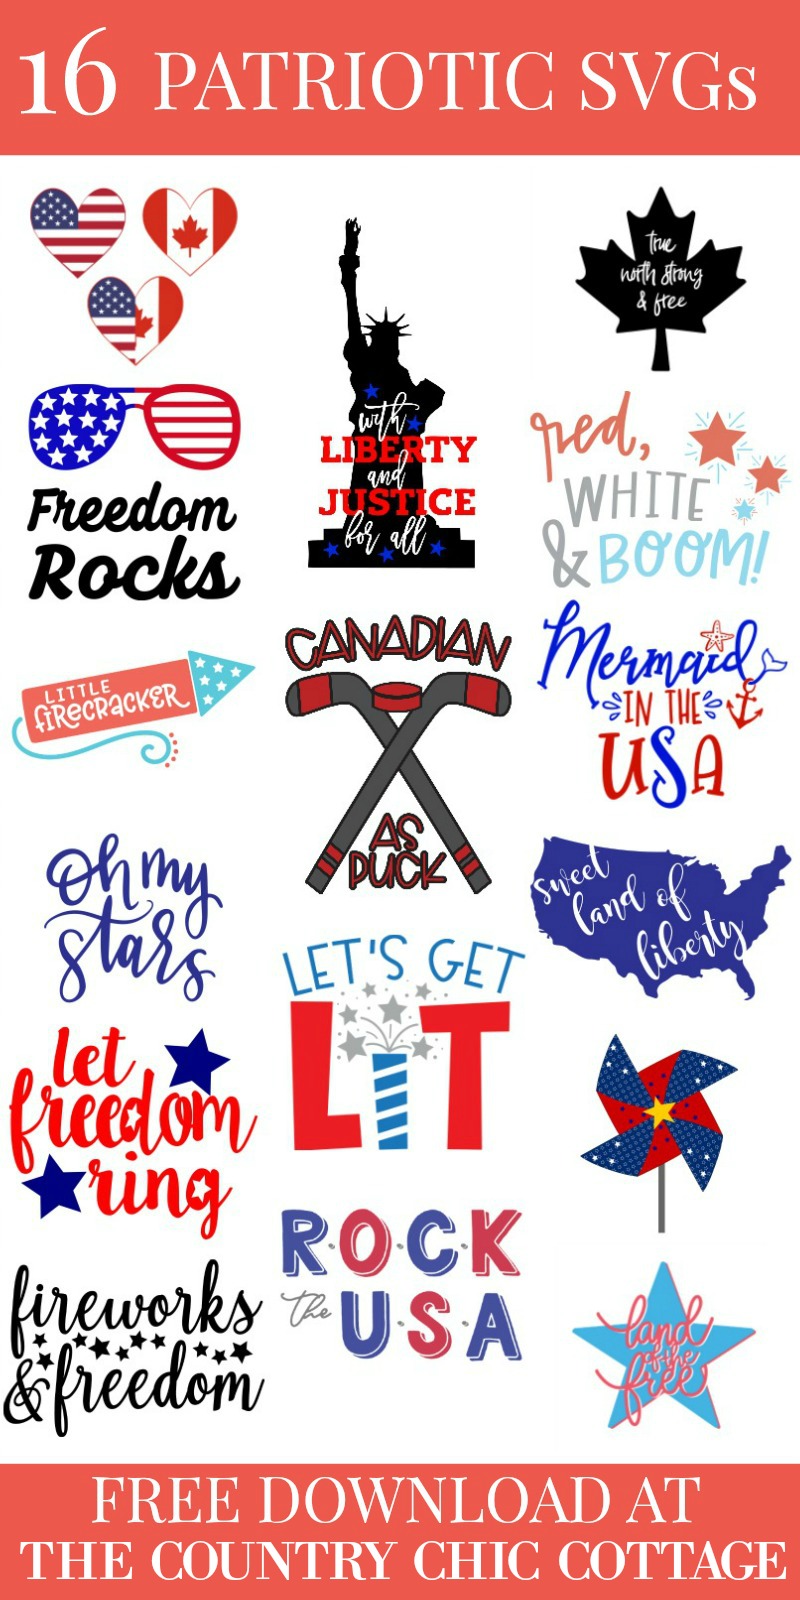 Download Patriotic SVG: 15 Free Files for Your Crafts - The Country ...